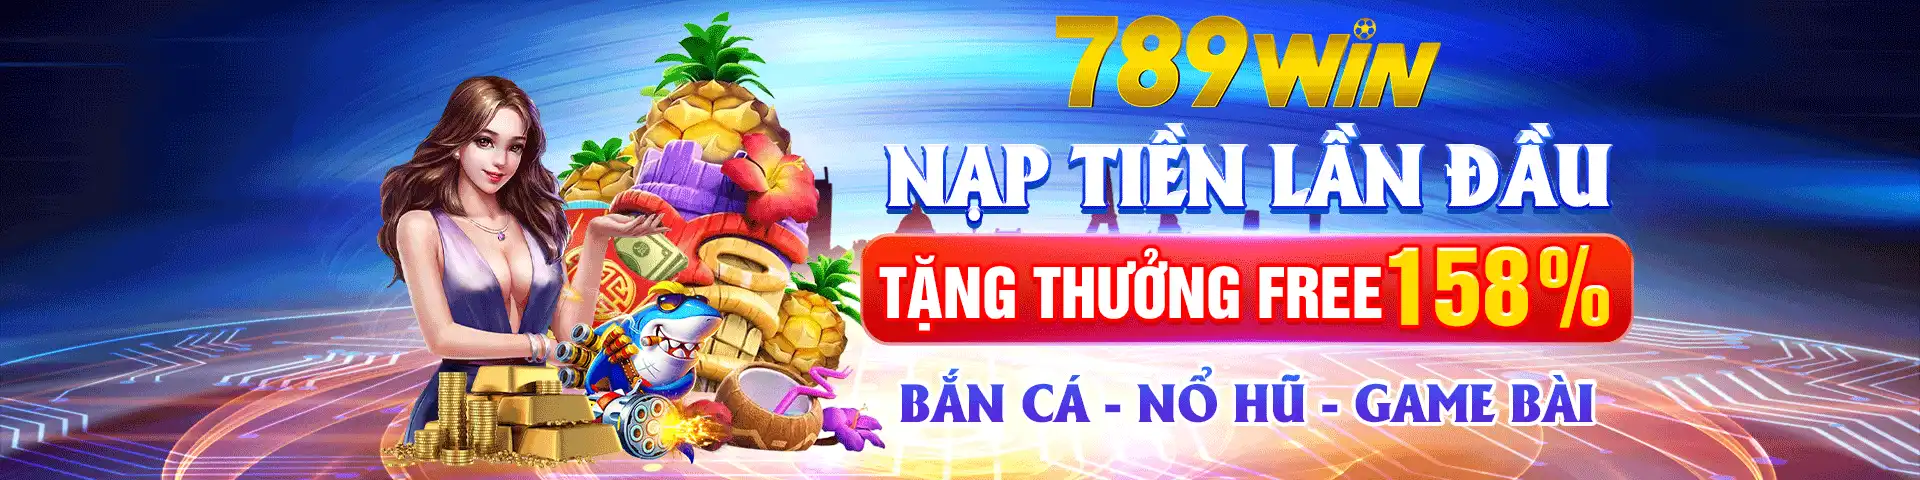 789win-cool-banner-02